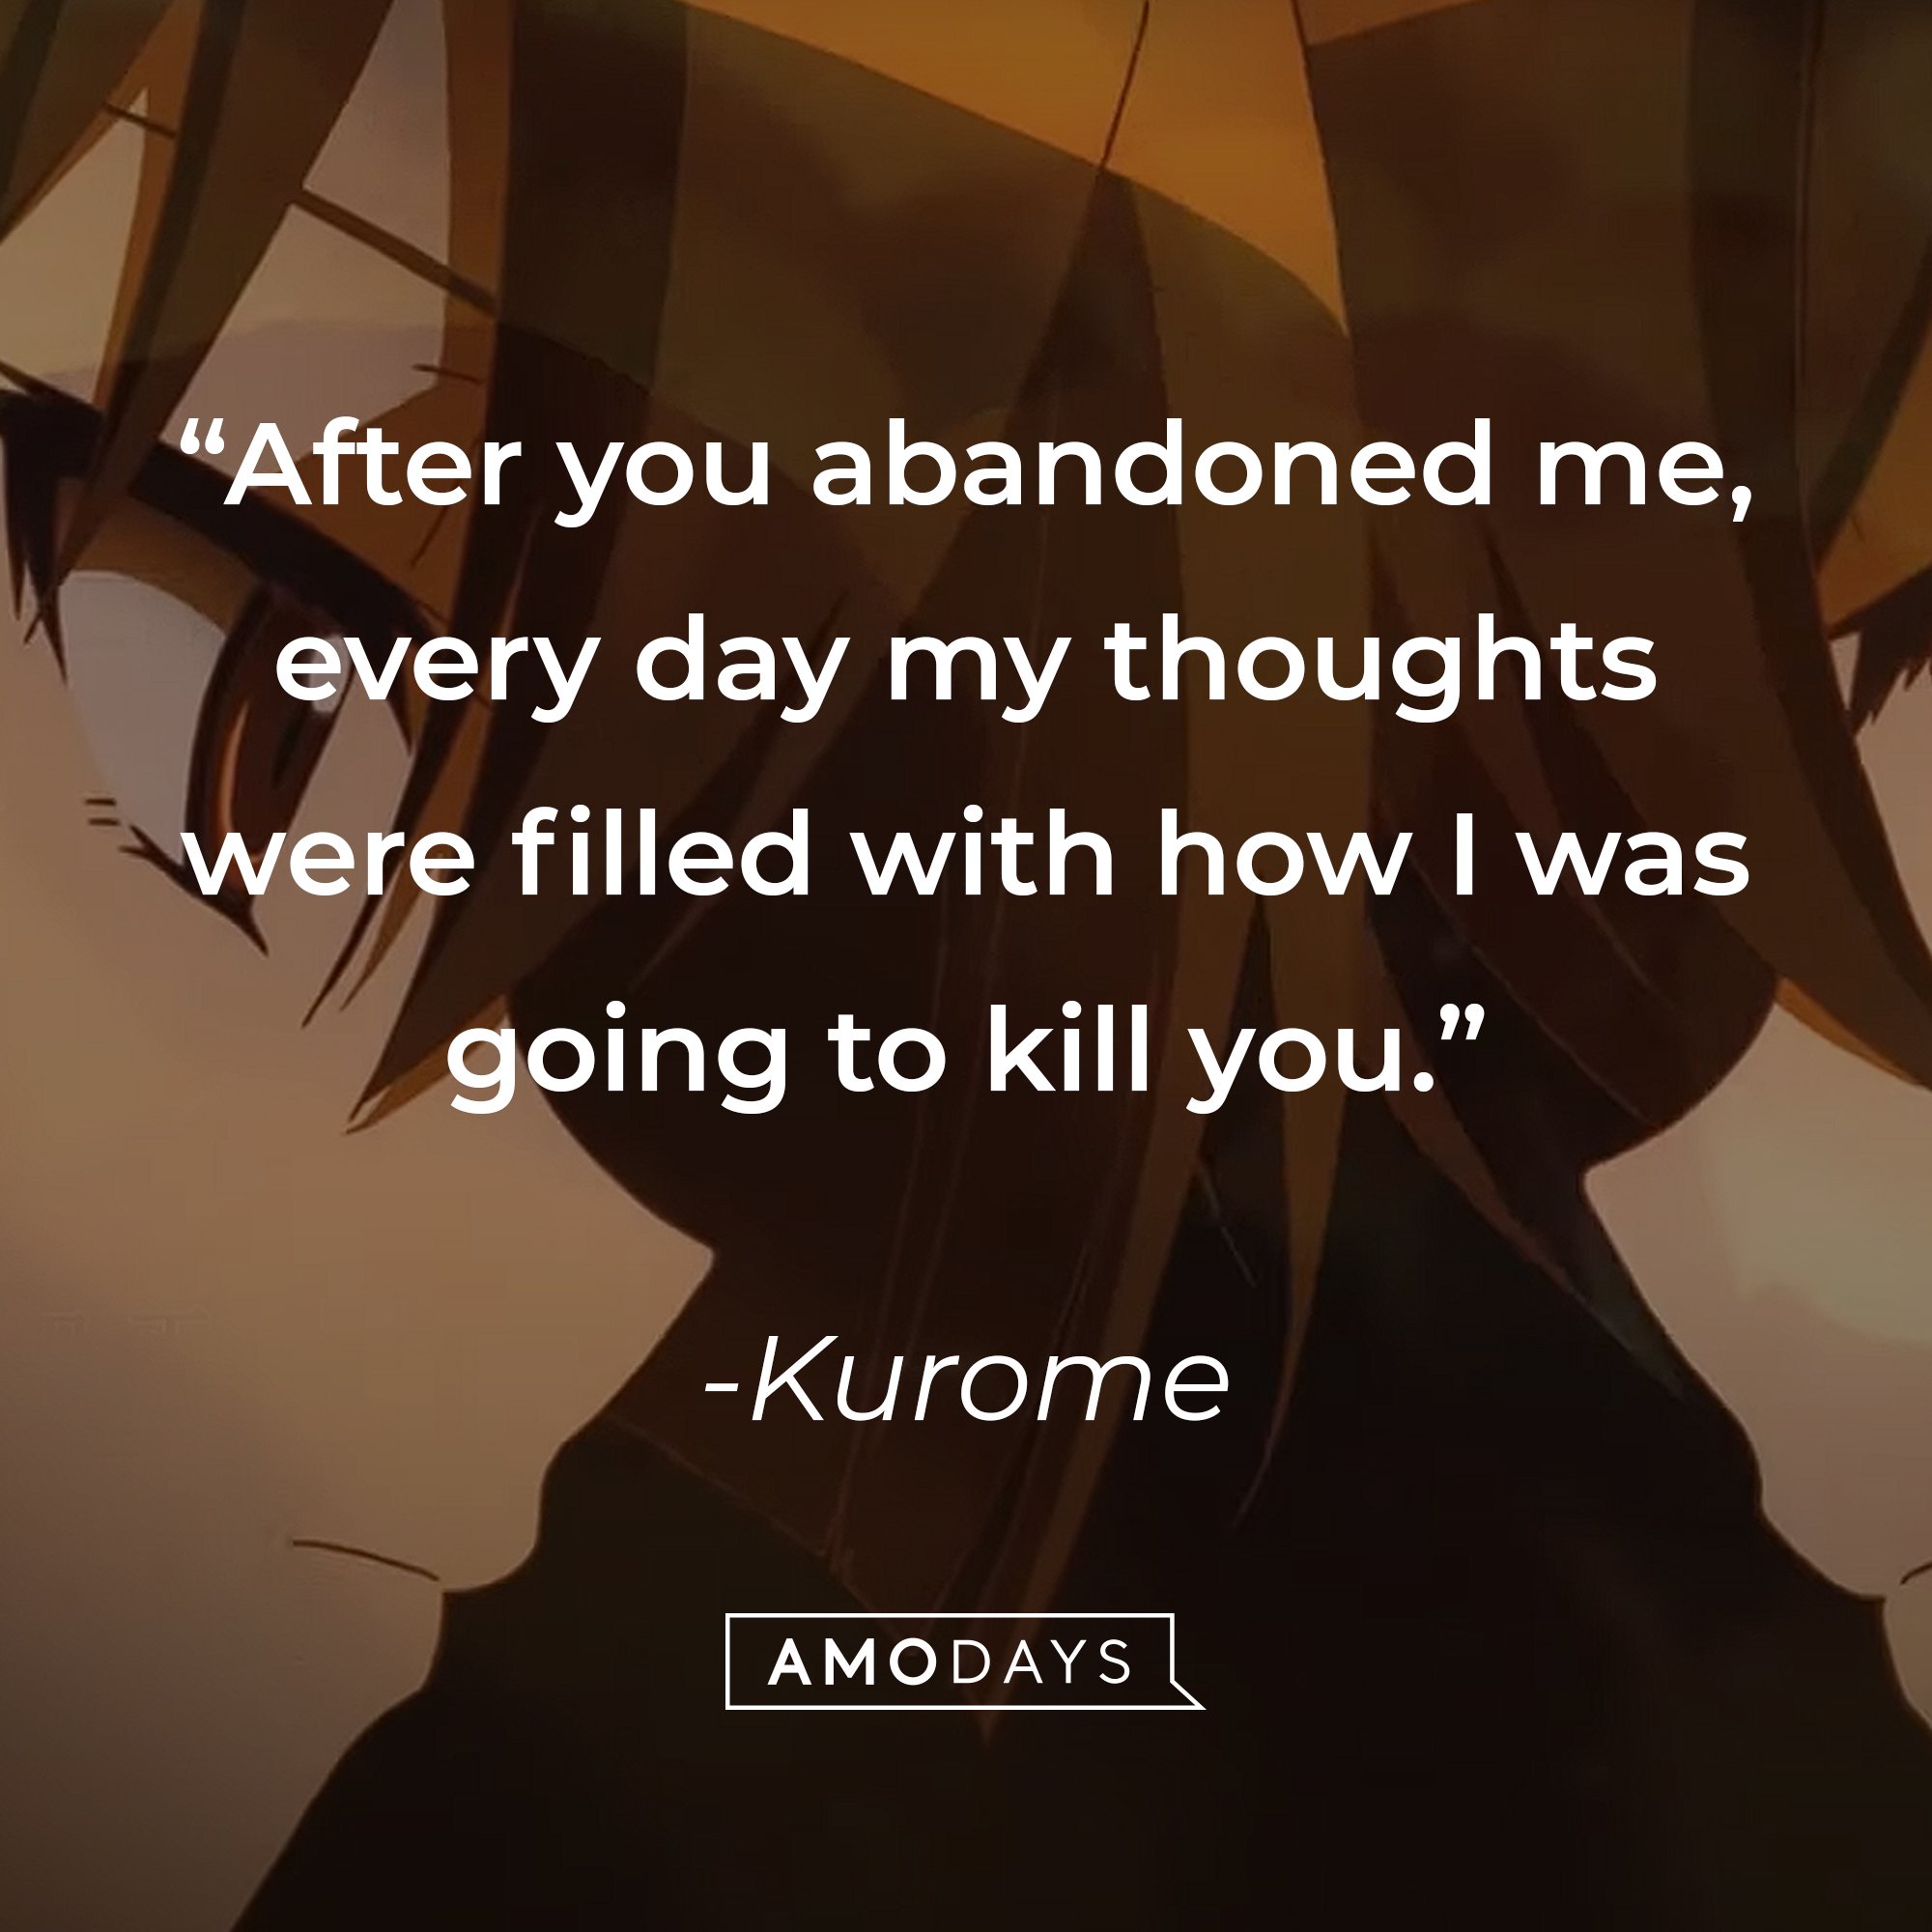 Kurome’s quote: “After you abandoned me, every day my thoughts were filled with how I was going to kill you." | Image: AmoDays